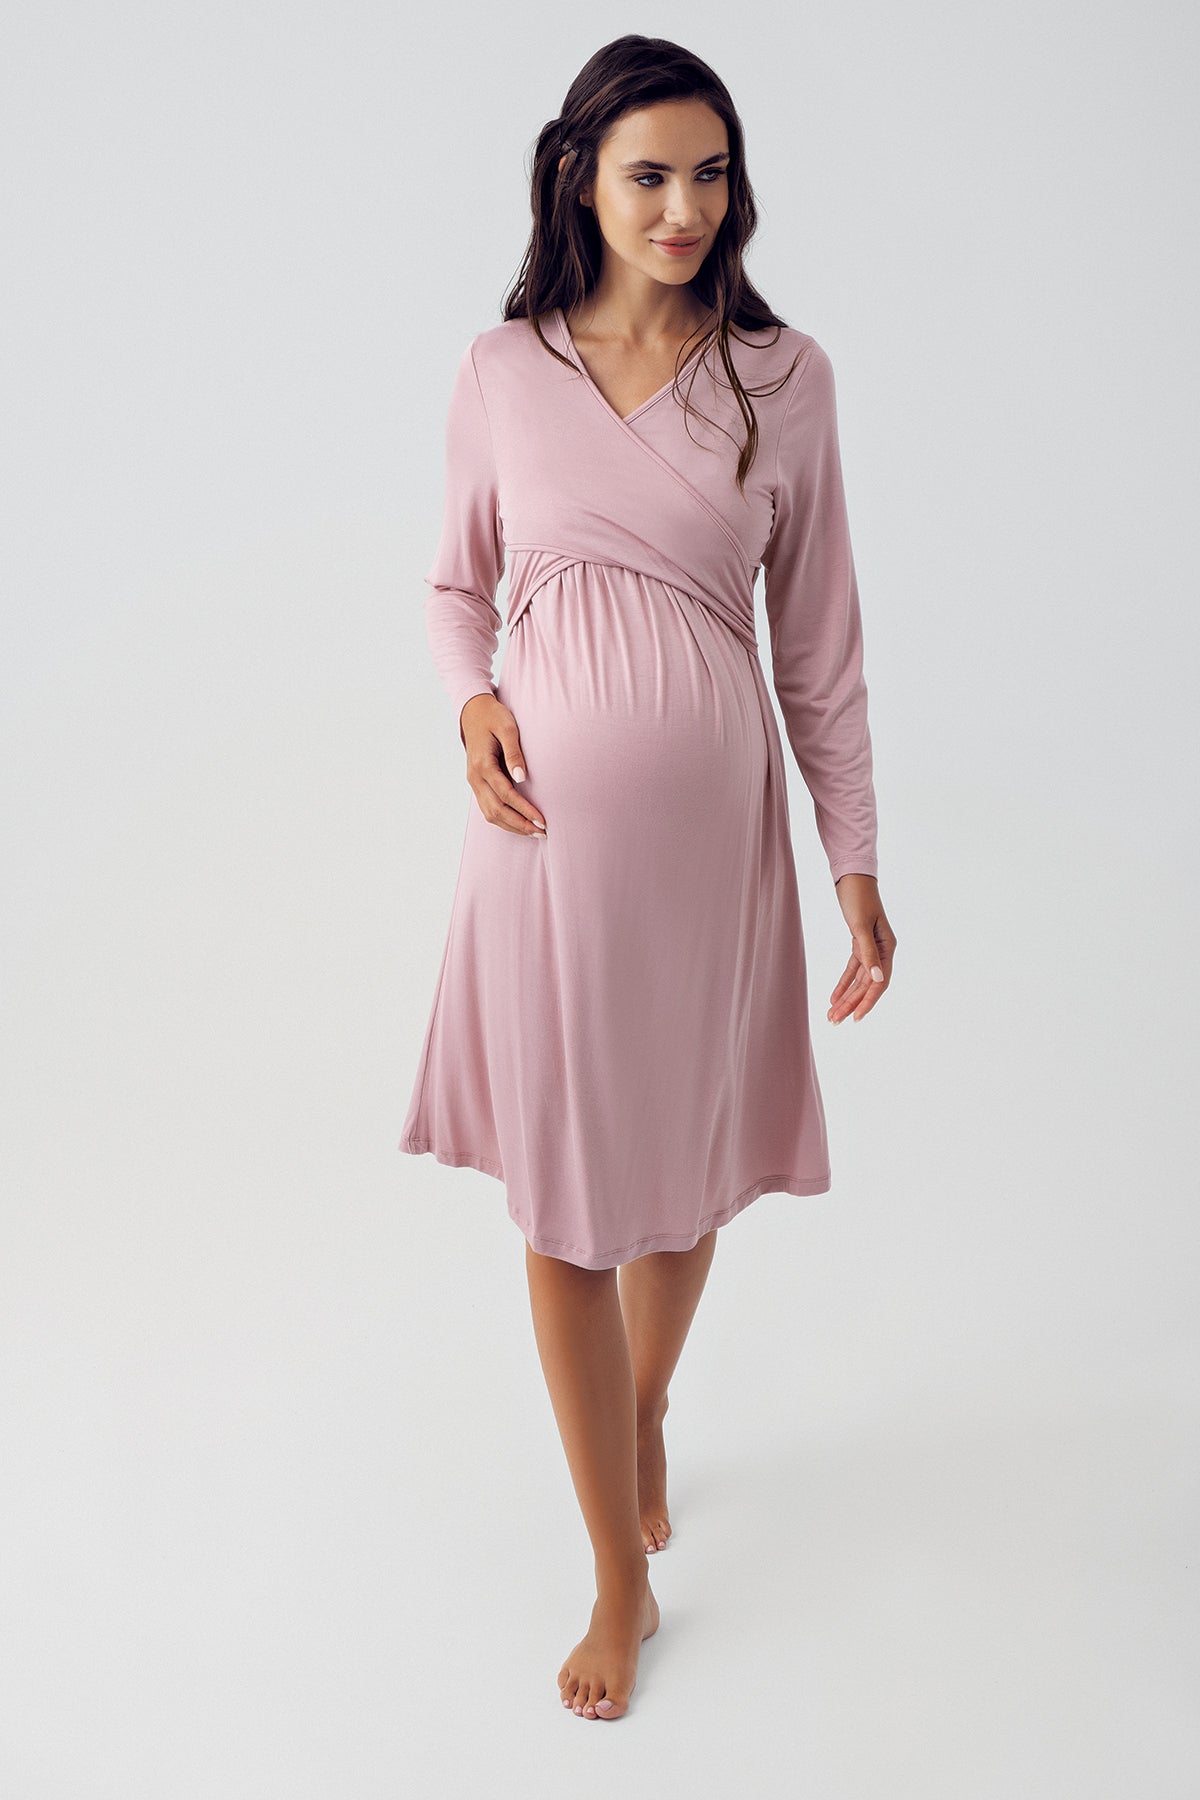 Shopymommy 15405 Cross Double Breasted Maternity & Nursing Nightgown With Patterned Robe Powder